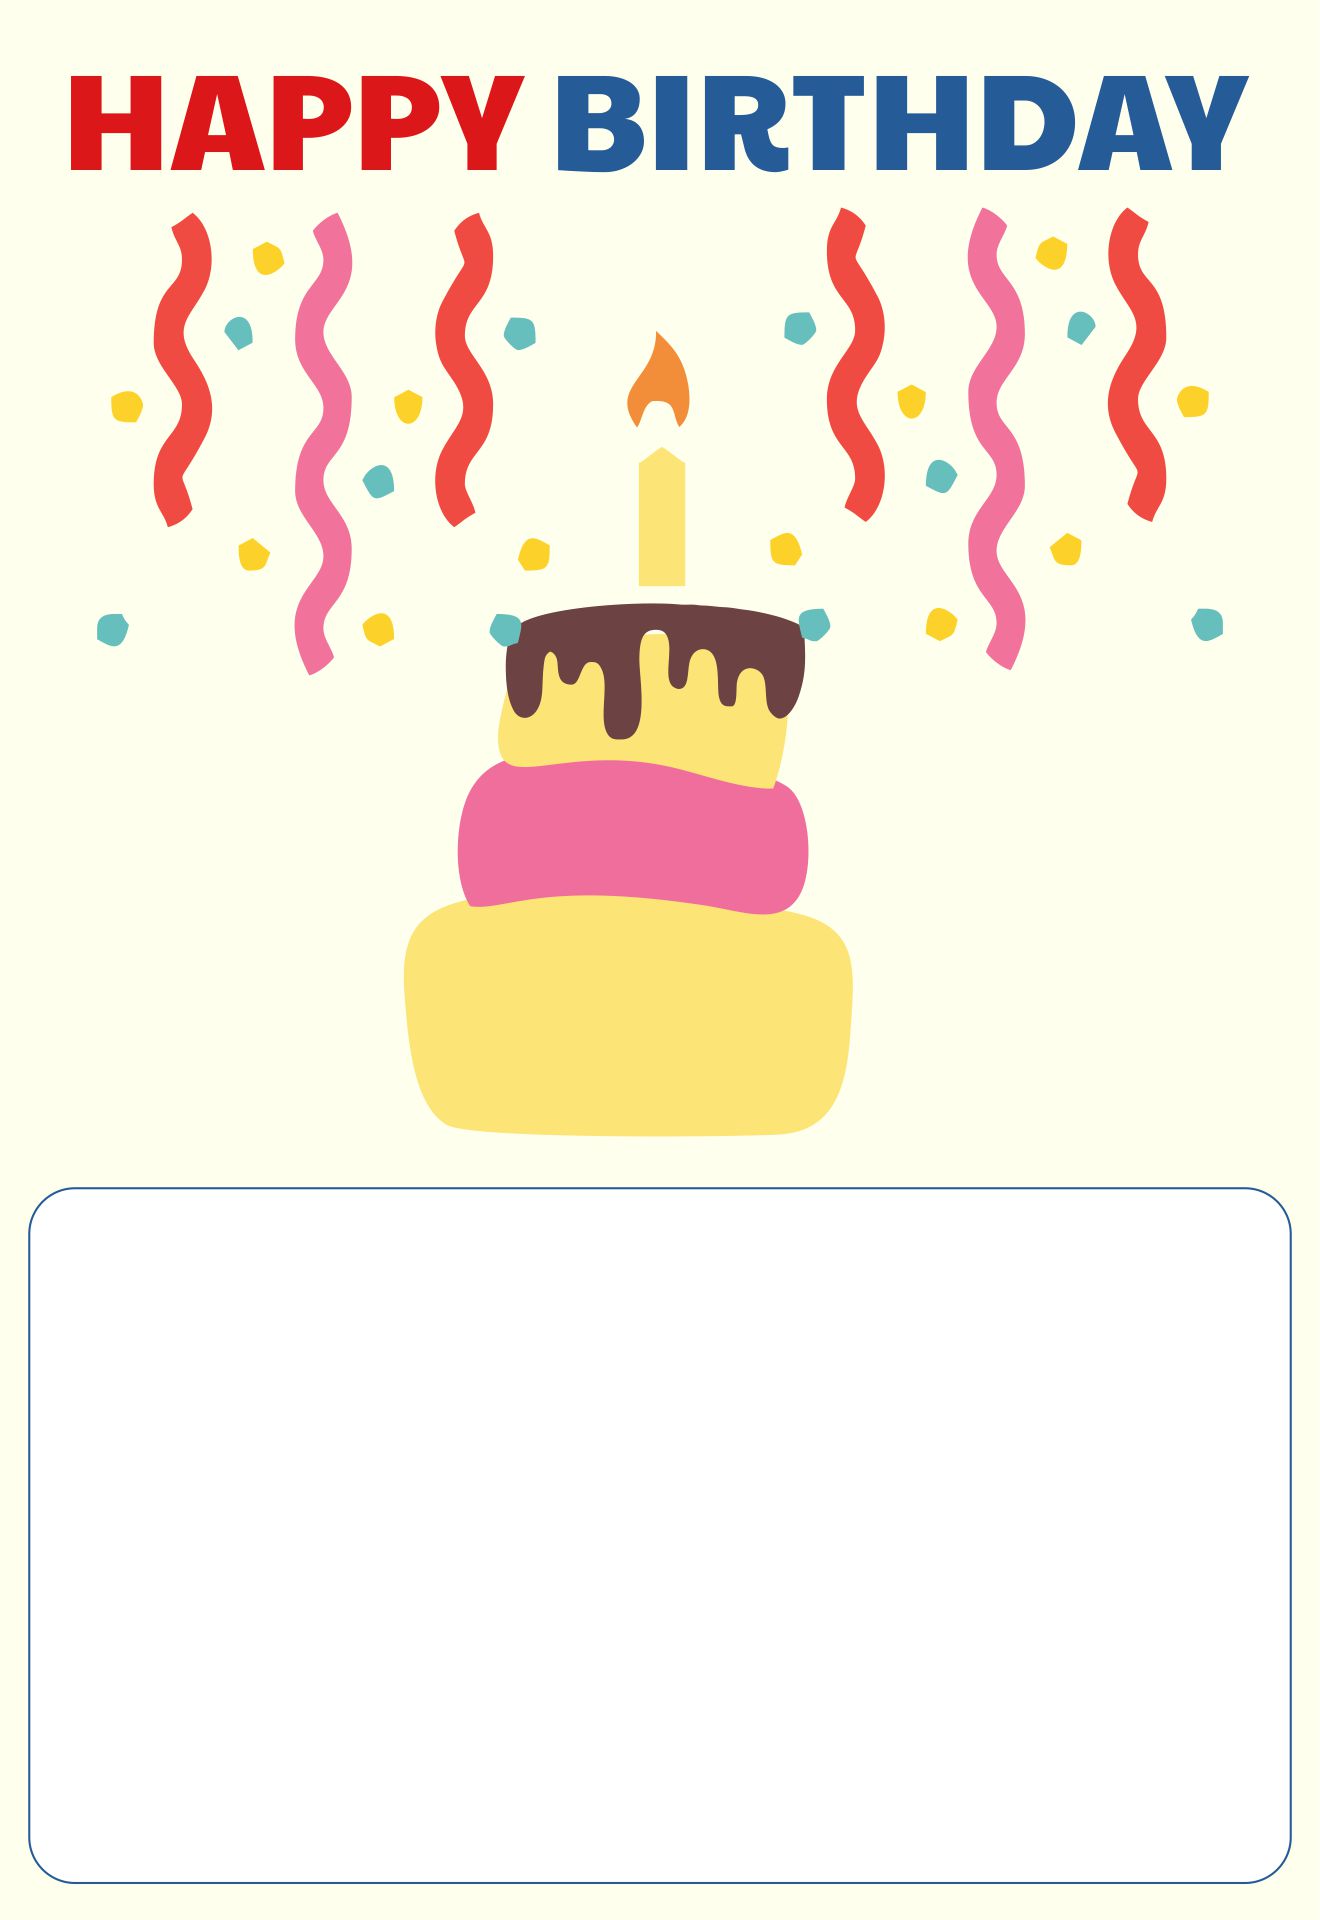 happy-birthday-wishes-template